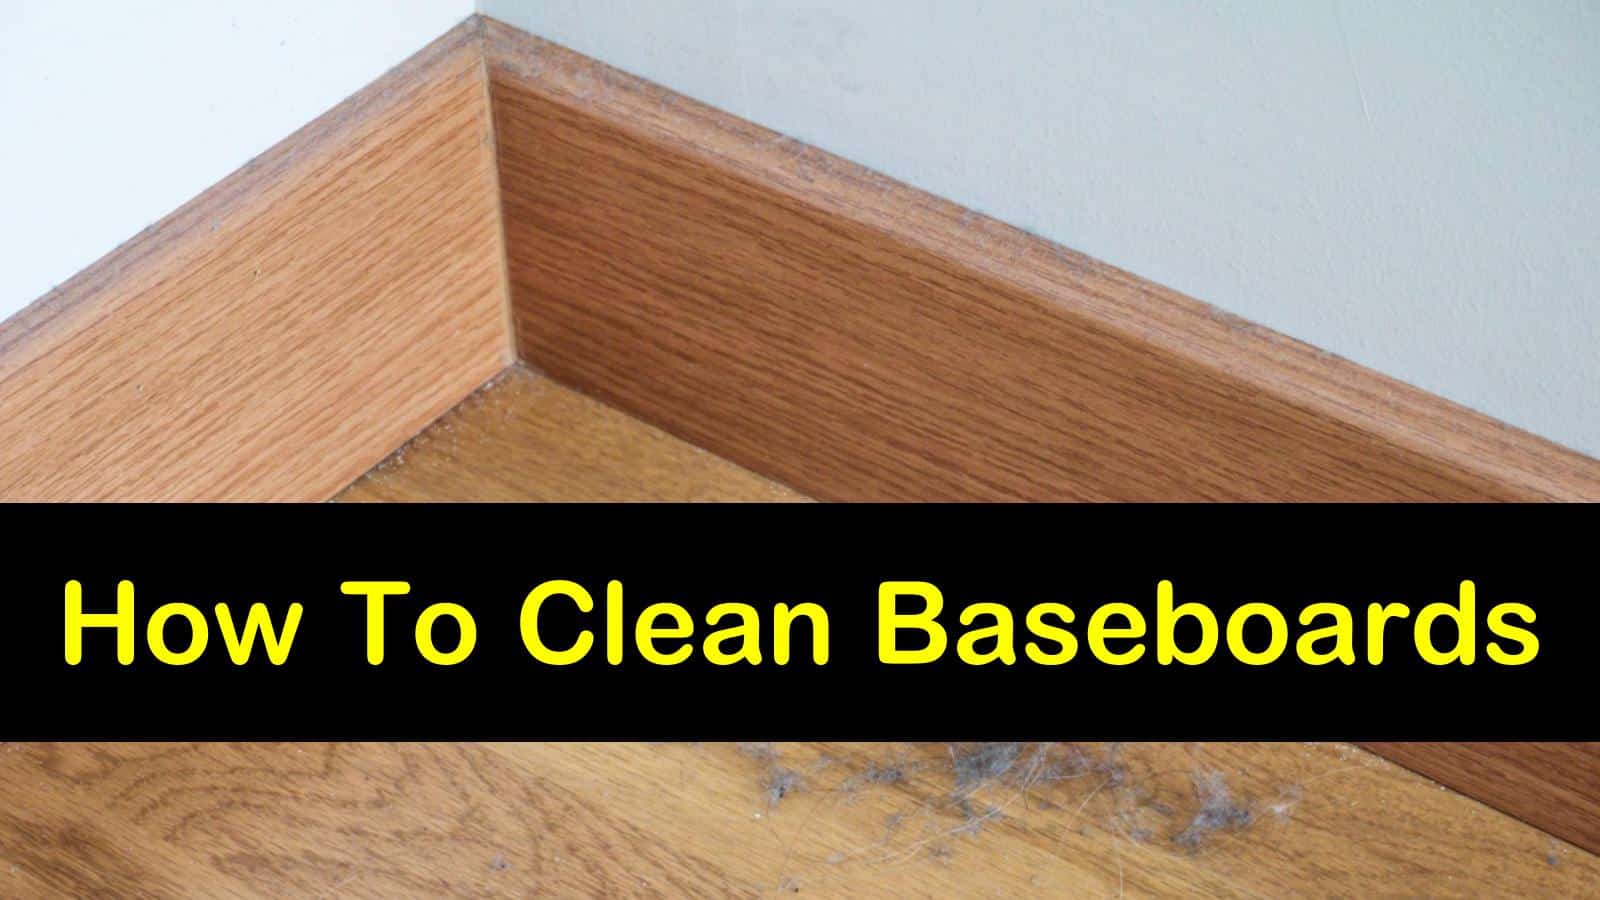 how to clean baseboards titleimg1